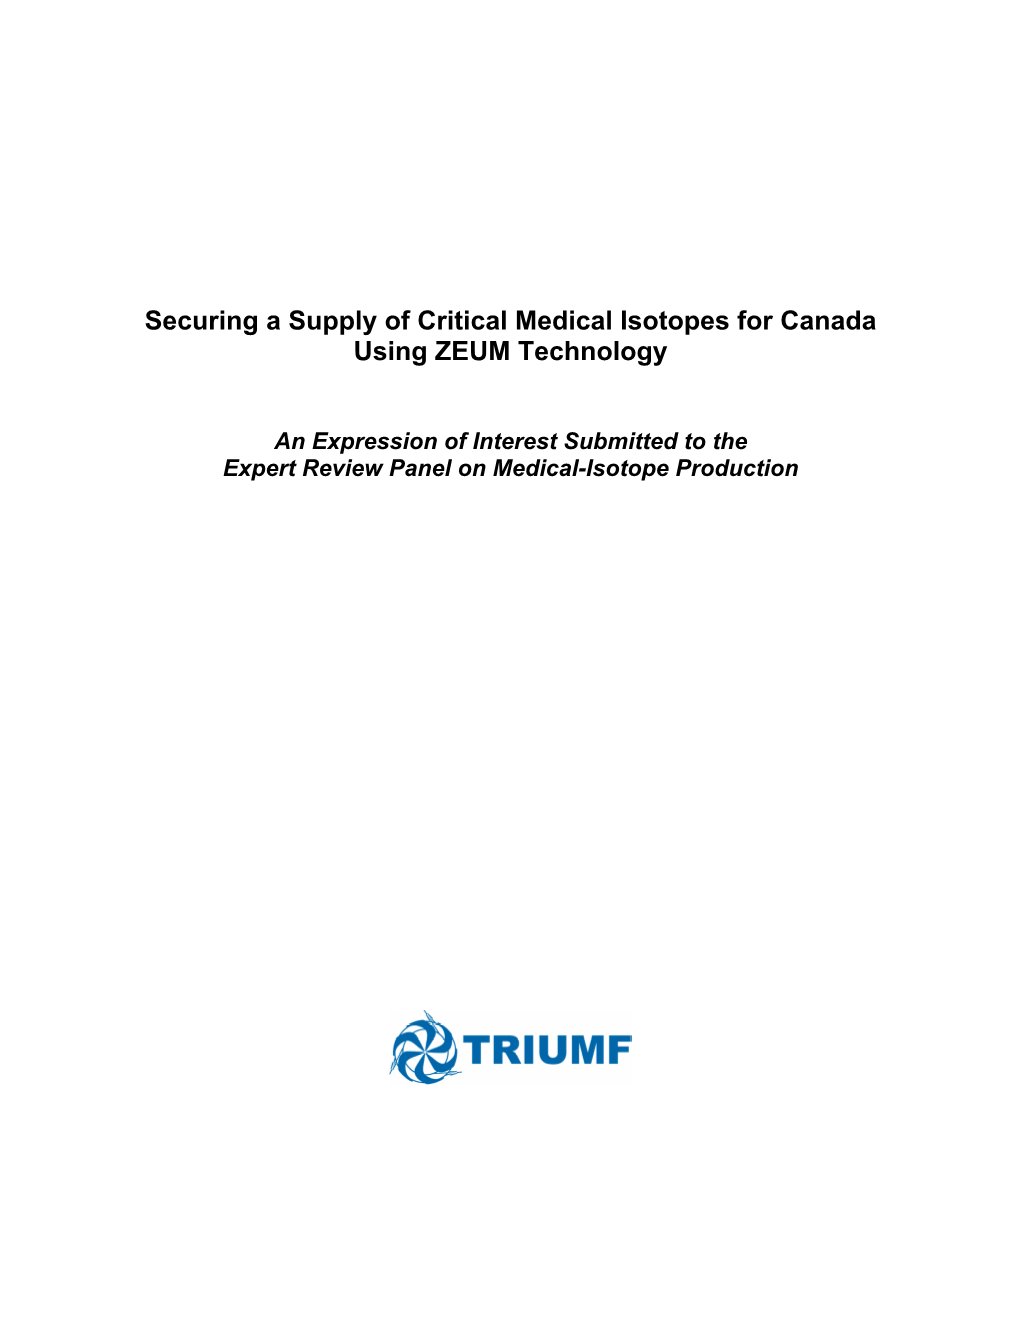 Securing a Supply of Critical Medical Isotopes for Canada Using ZEUM Technology